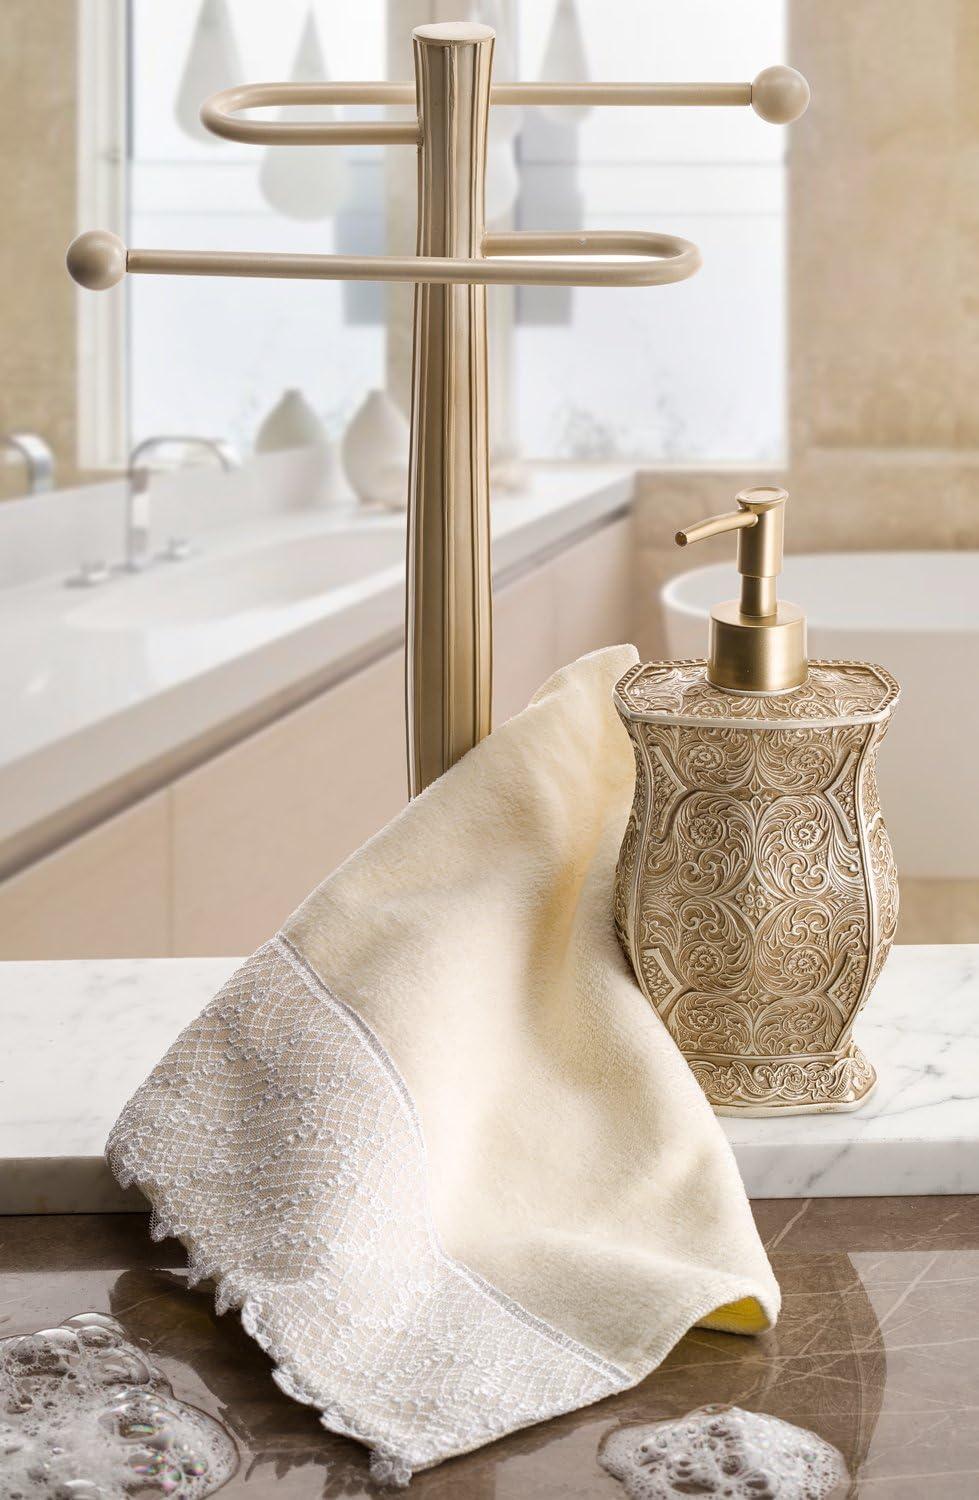 Lace Edged Towels